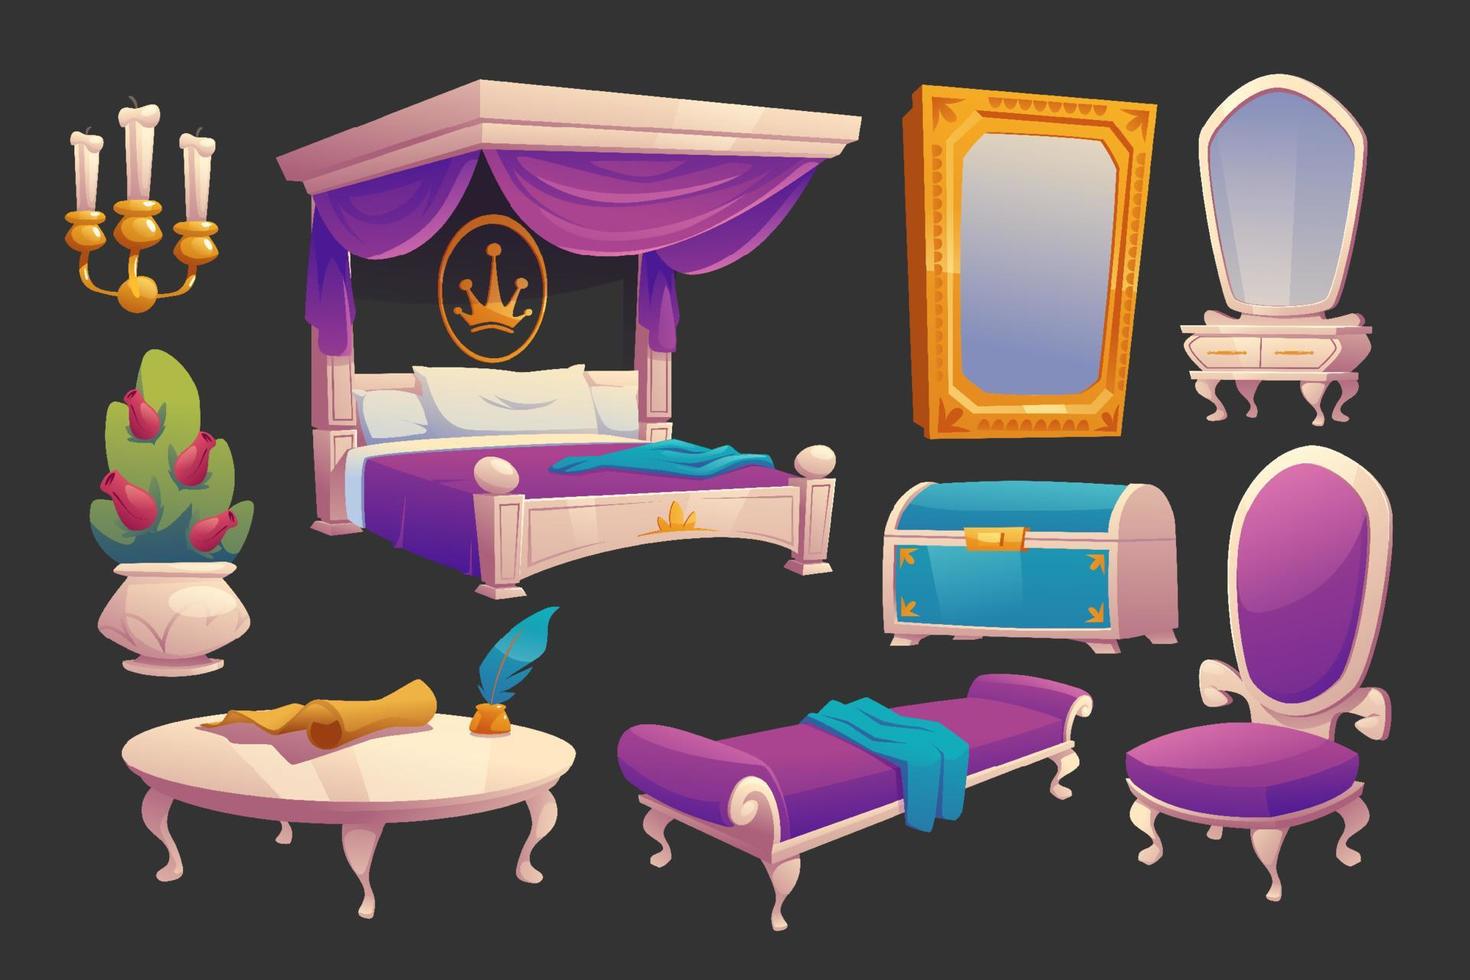 Luxury furniture for royal bedroom vector